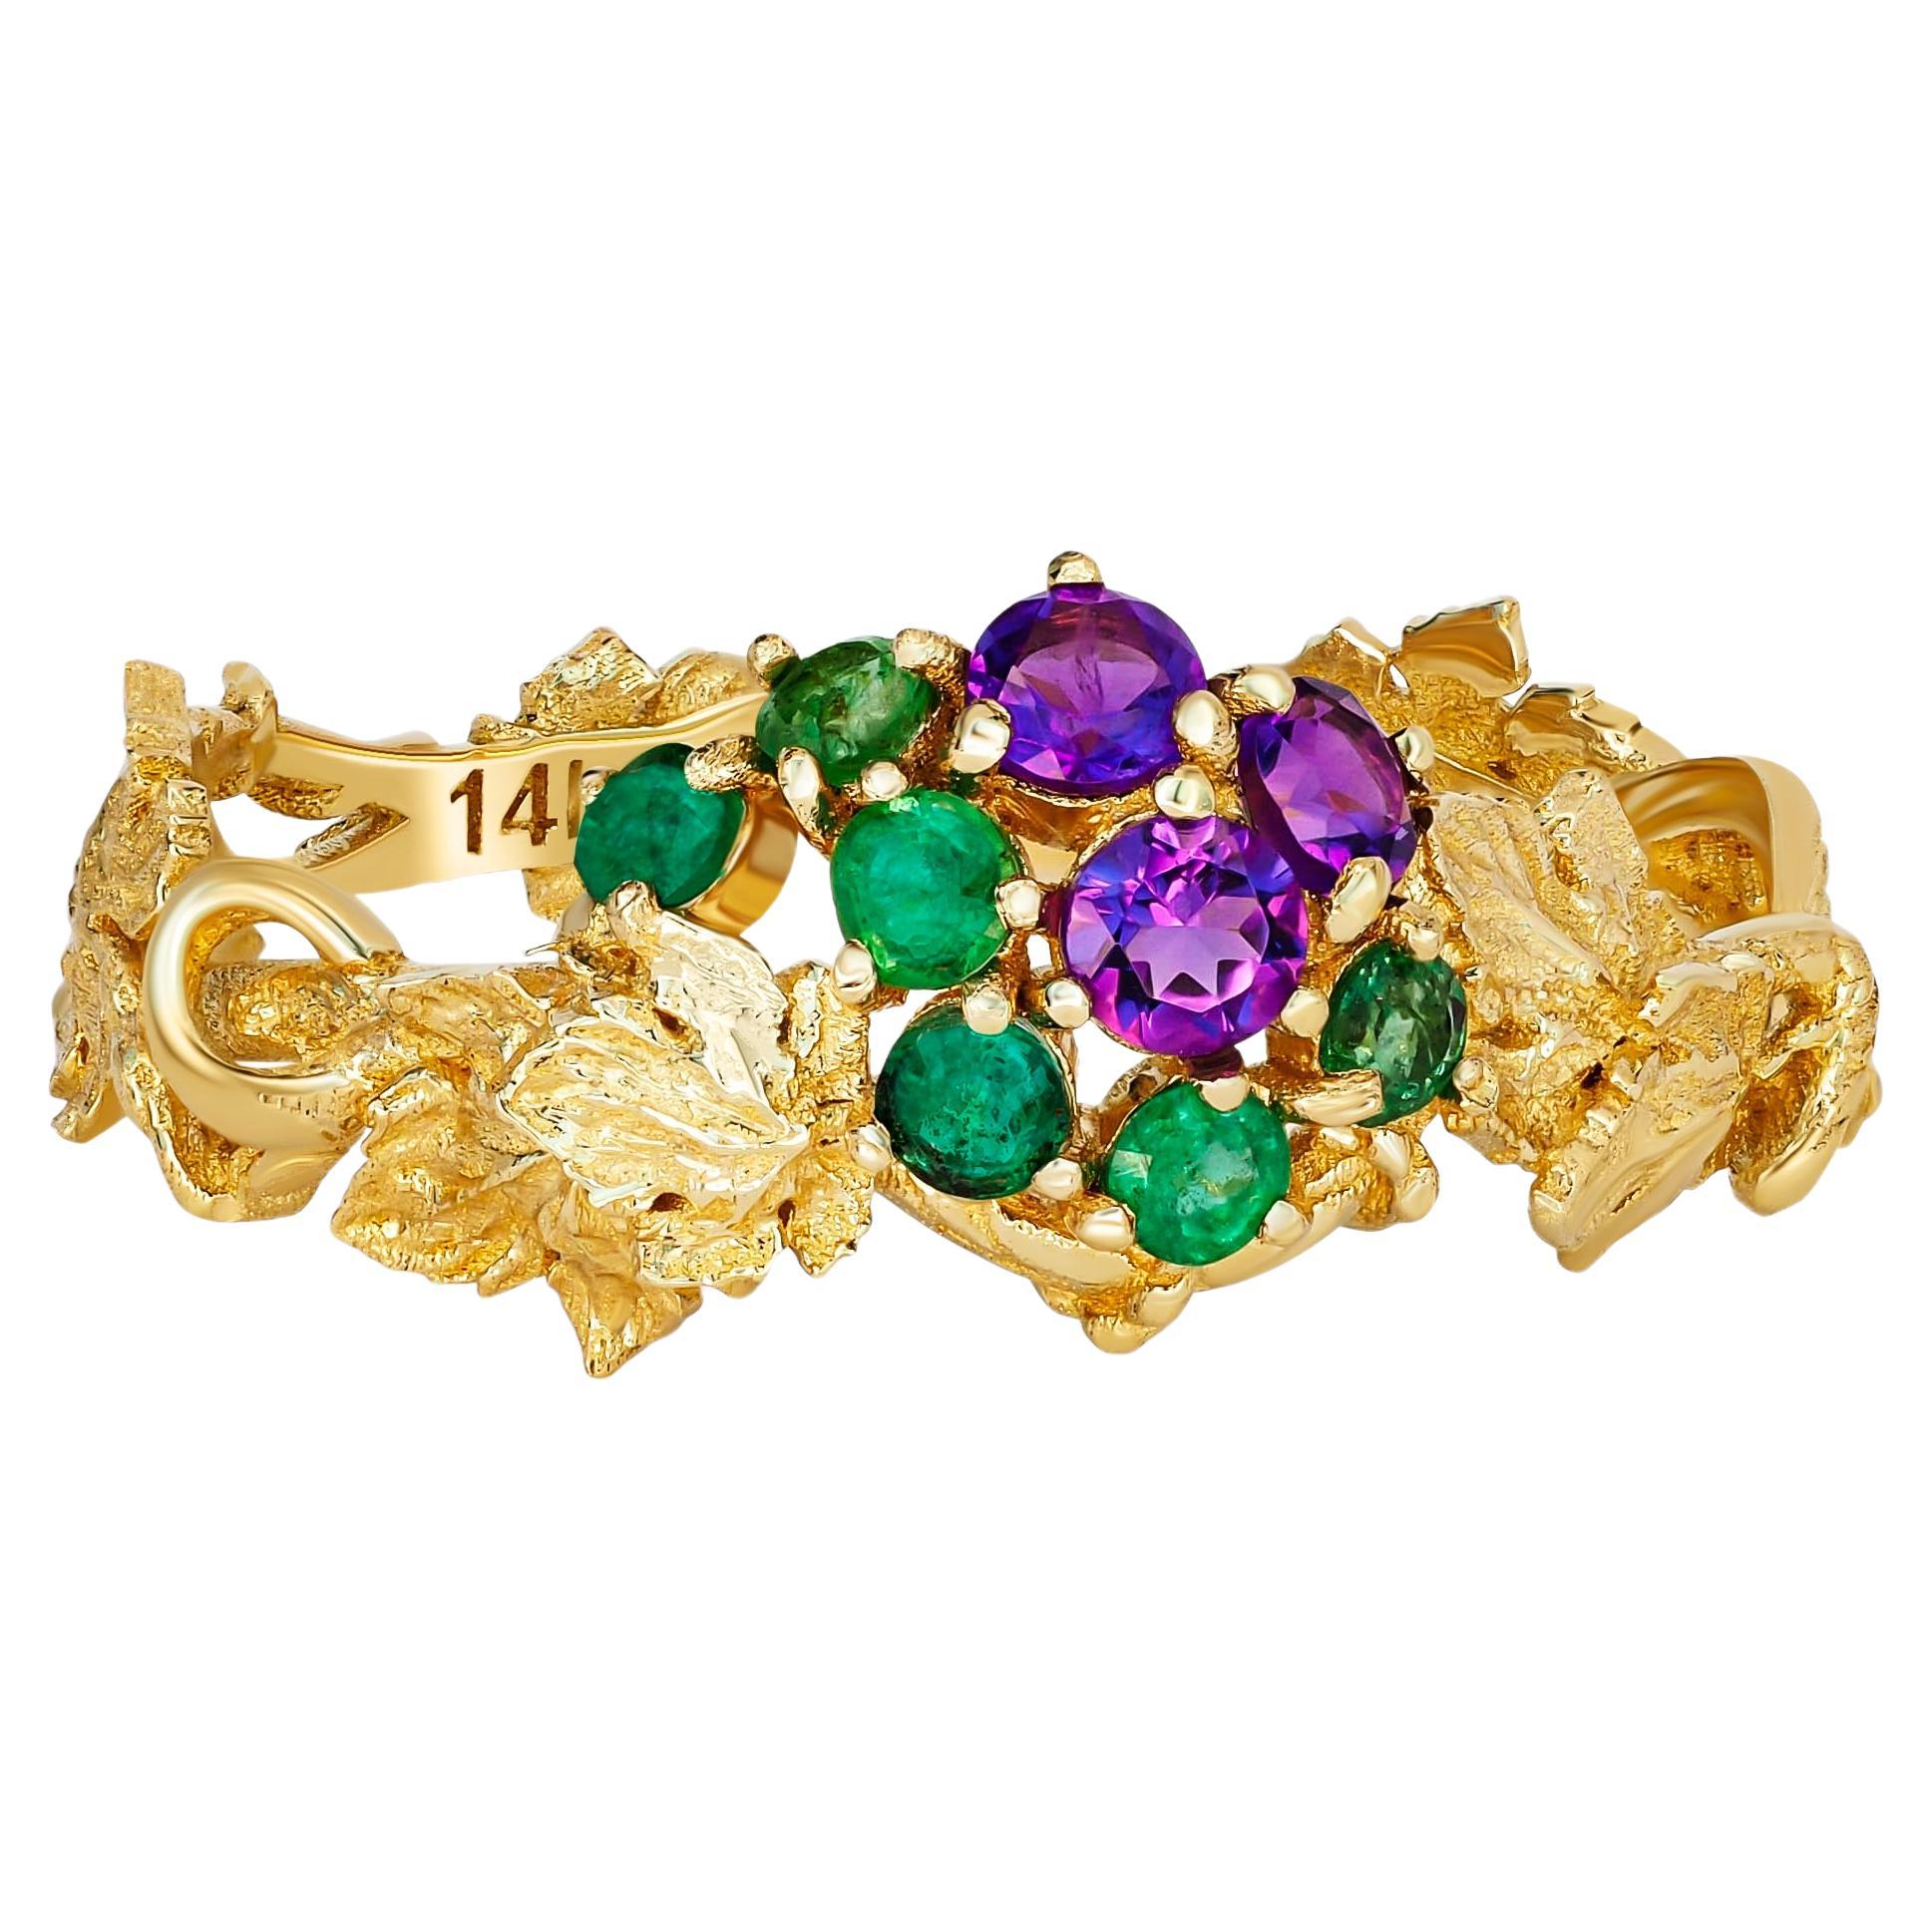 Grape ring with emeralds, amethysts in 14k gold. 